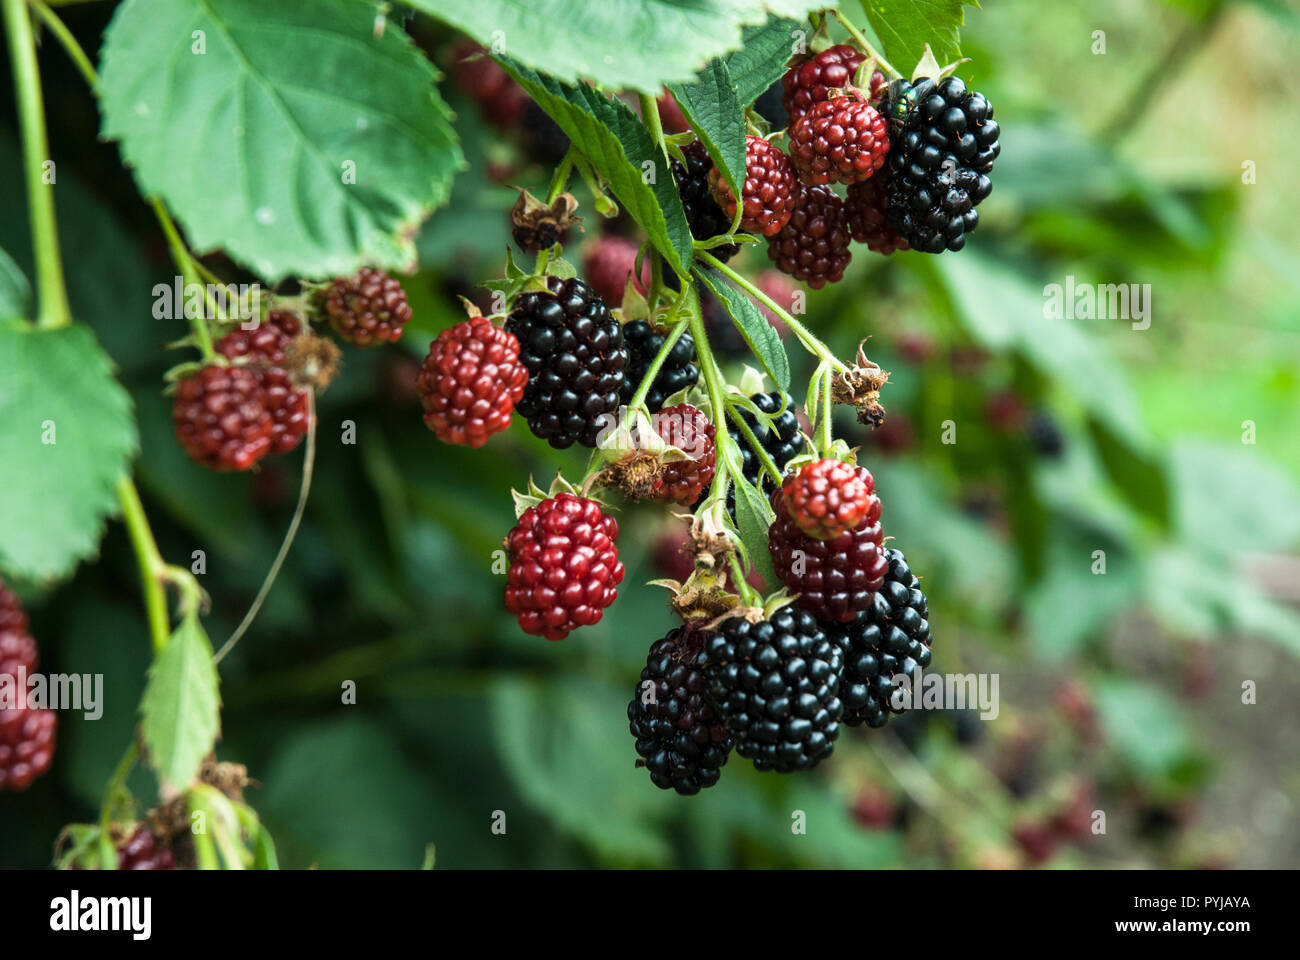 A vibrant sprig of cultivated thornless blackberries with ripe and unripe fruit. Stock Photo